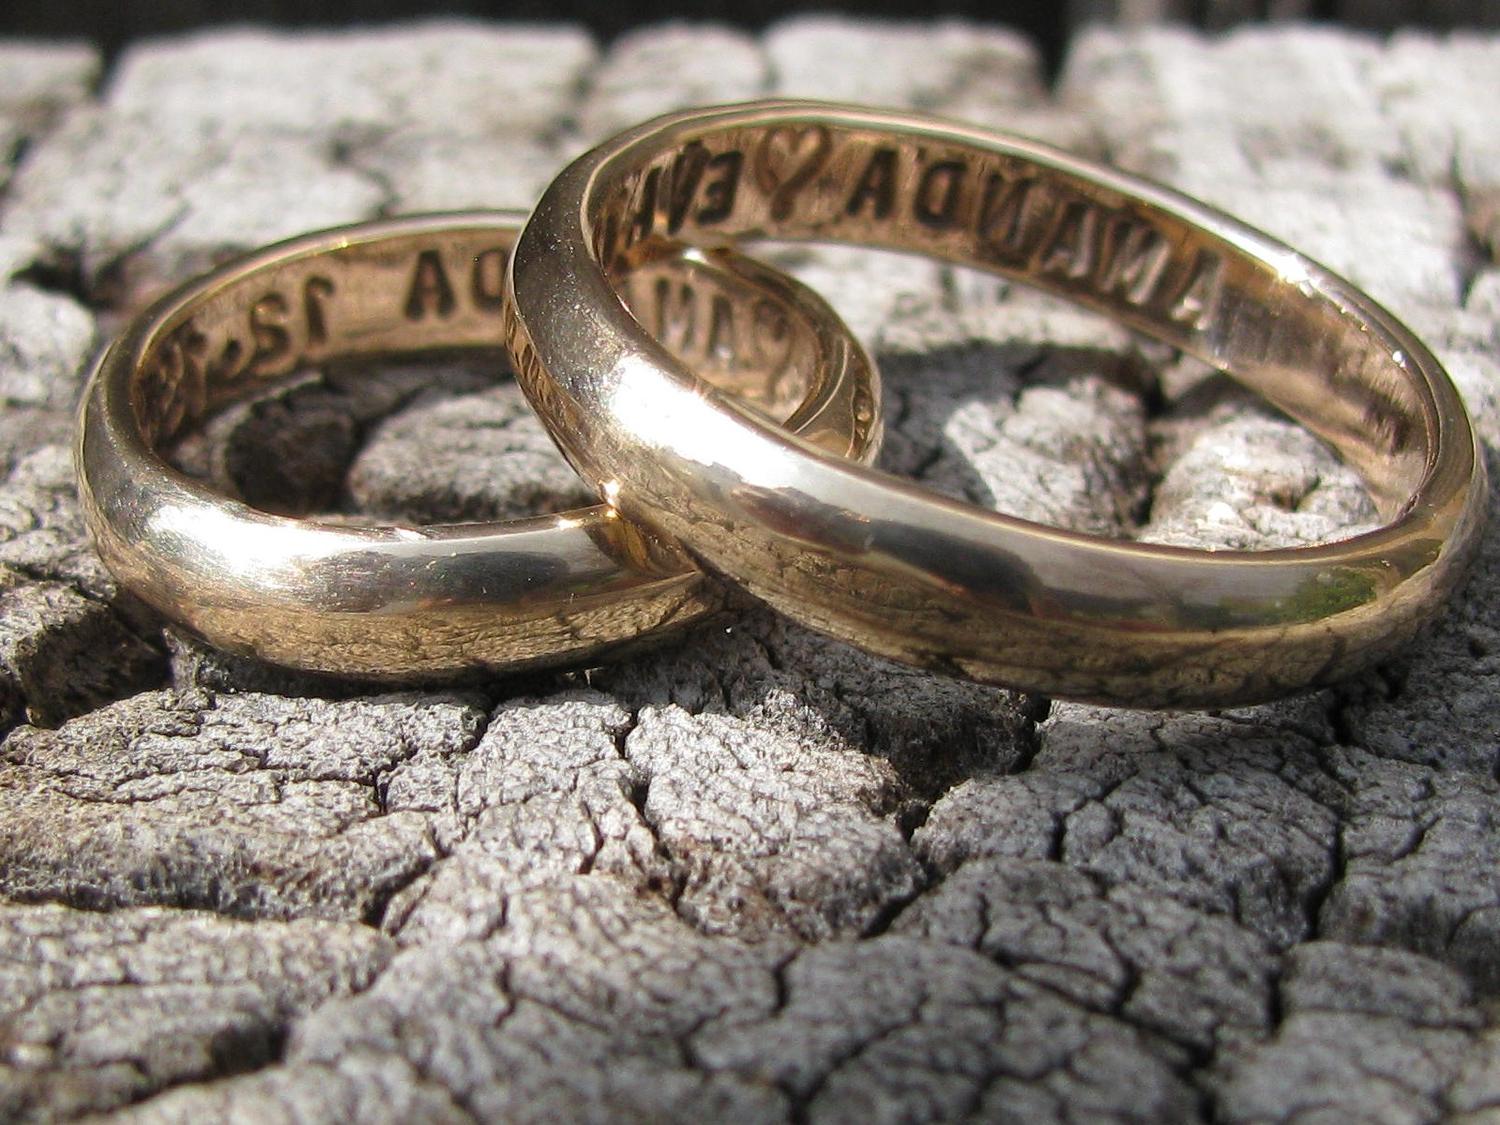 His and Her engraved wedding